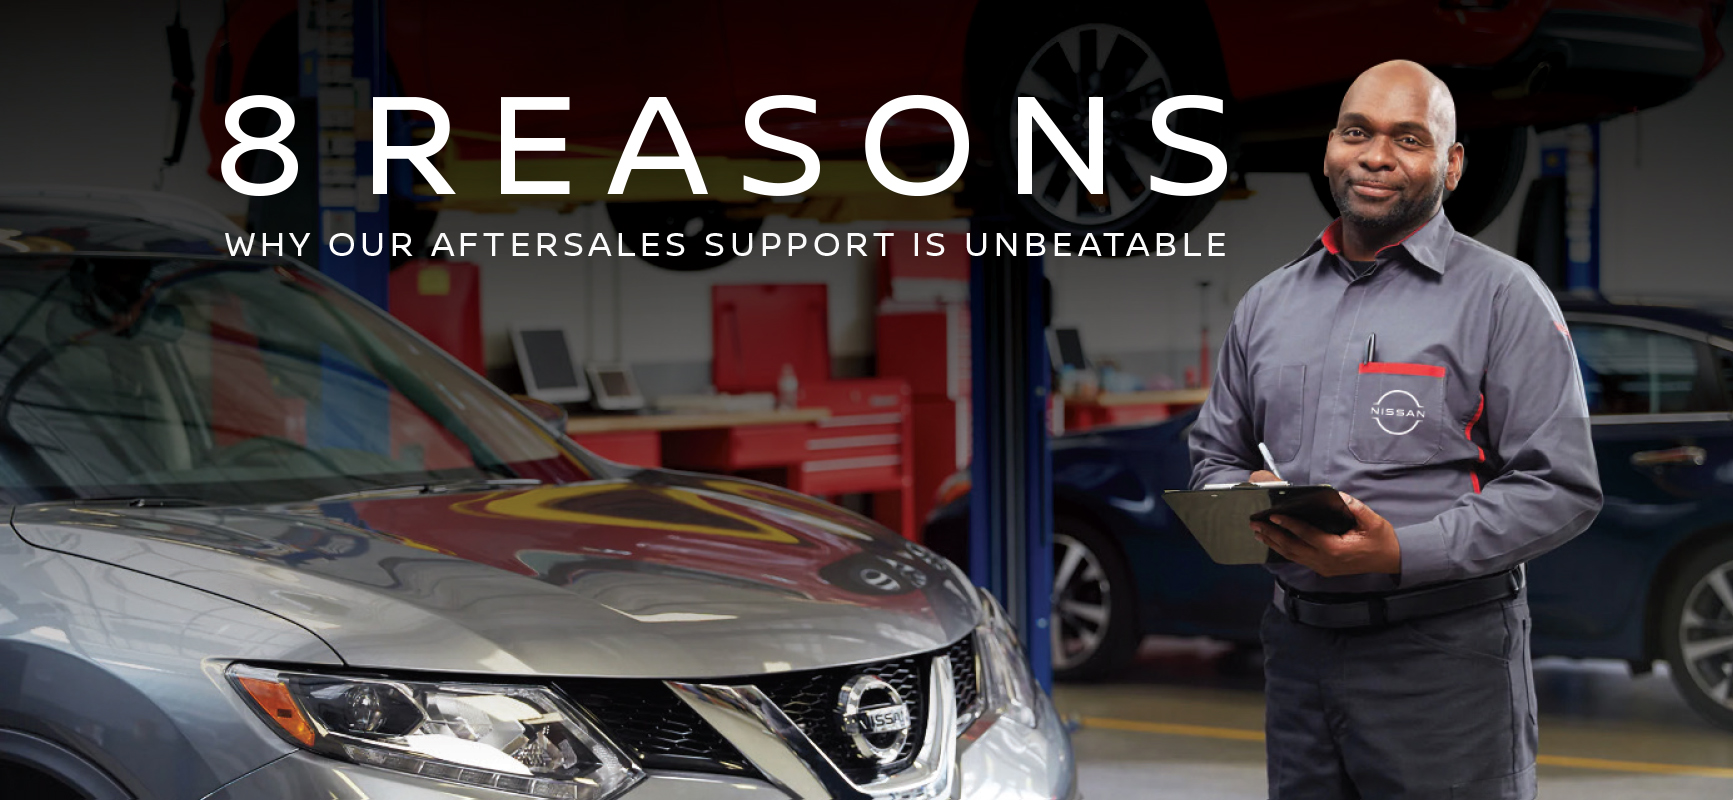 NISSAN’S AFTERSALES SUPPORT